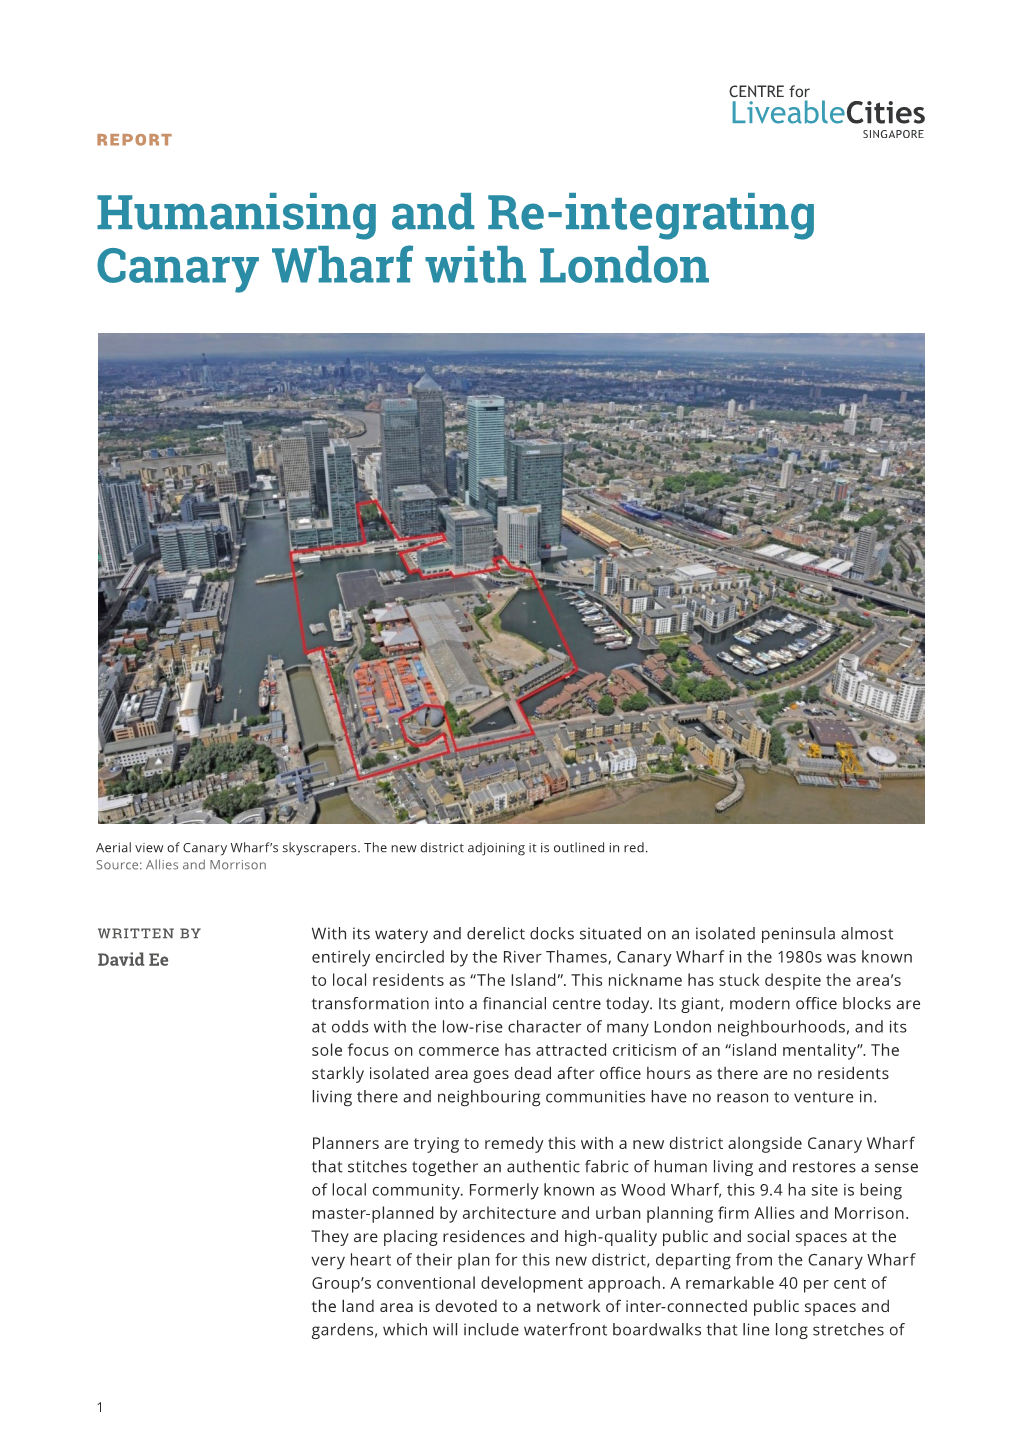 Humanising and Re-Integrating Canary Wharf with London